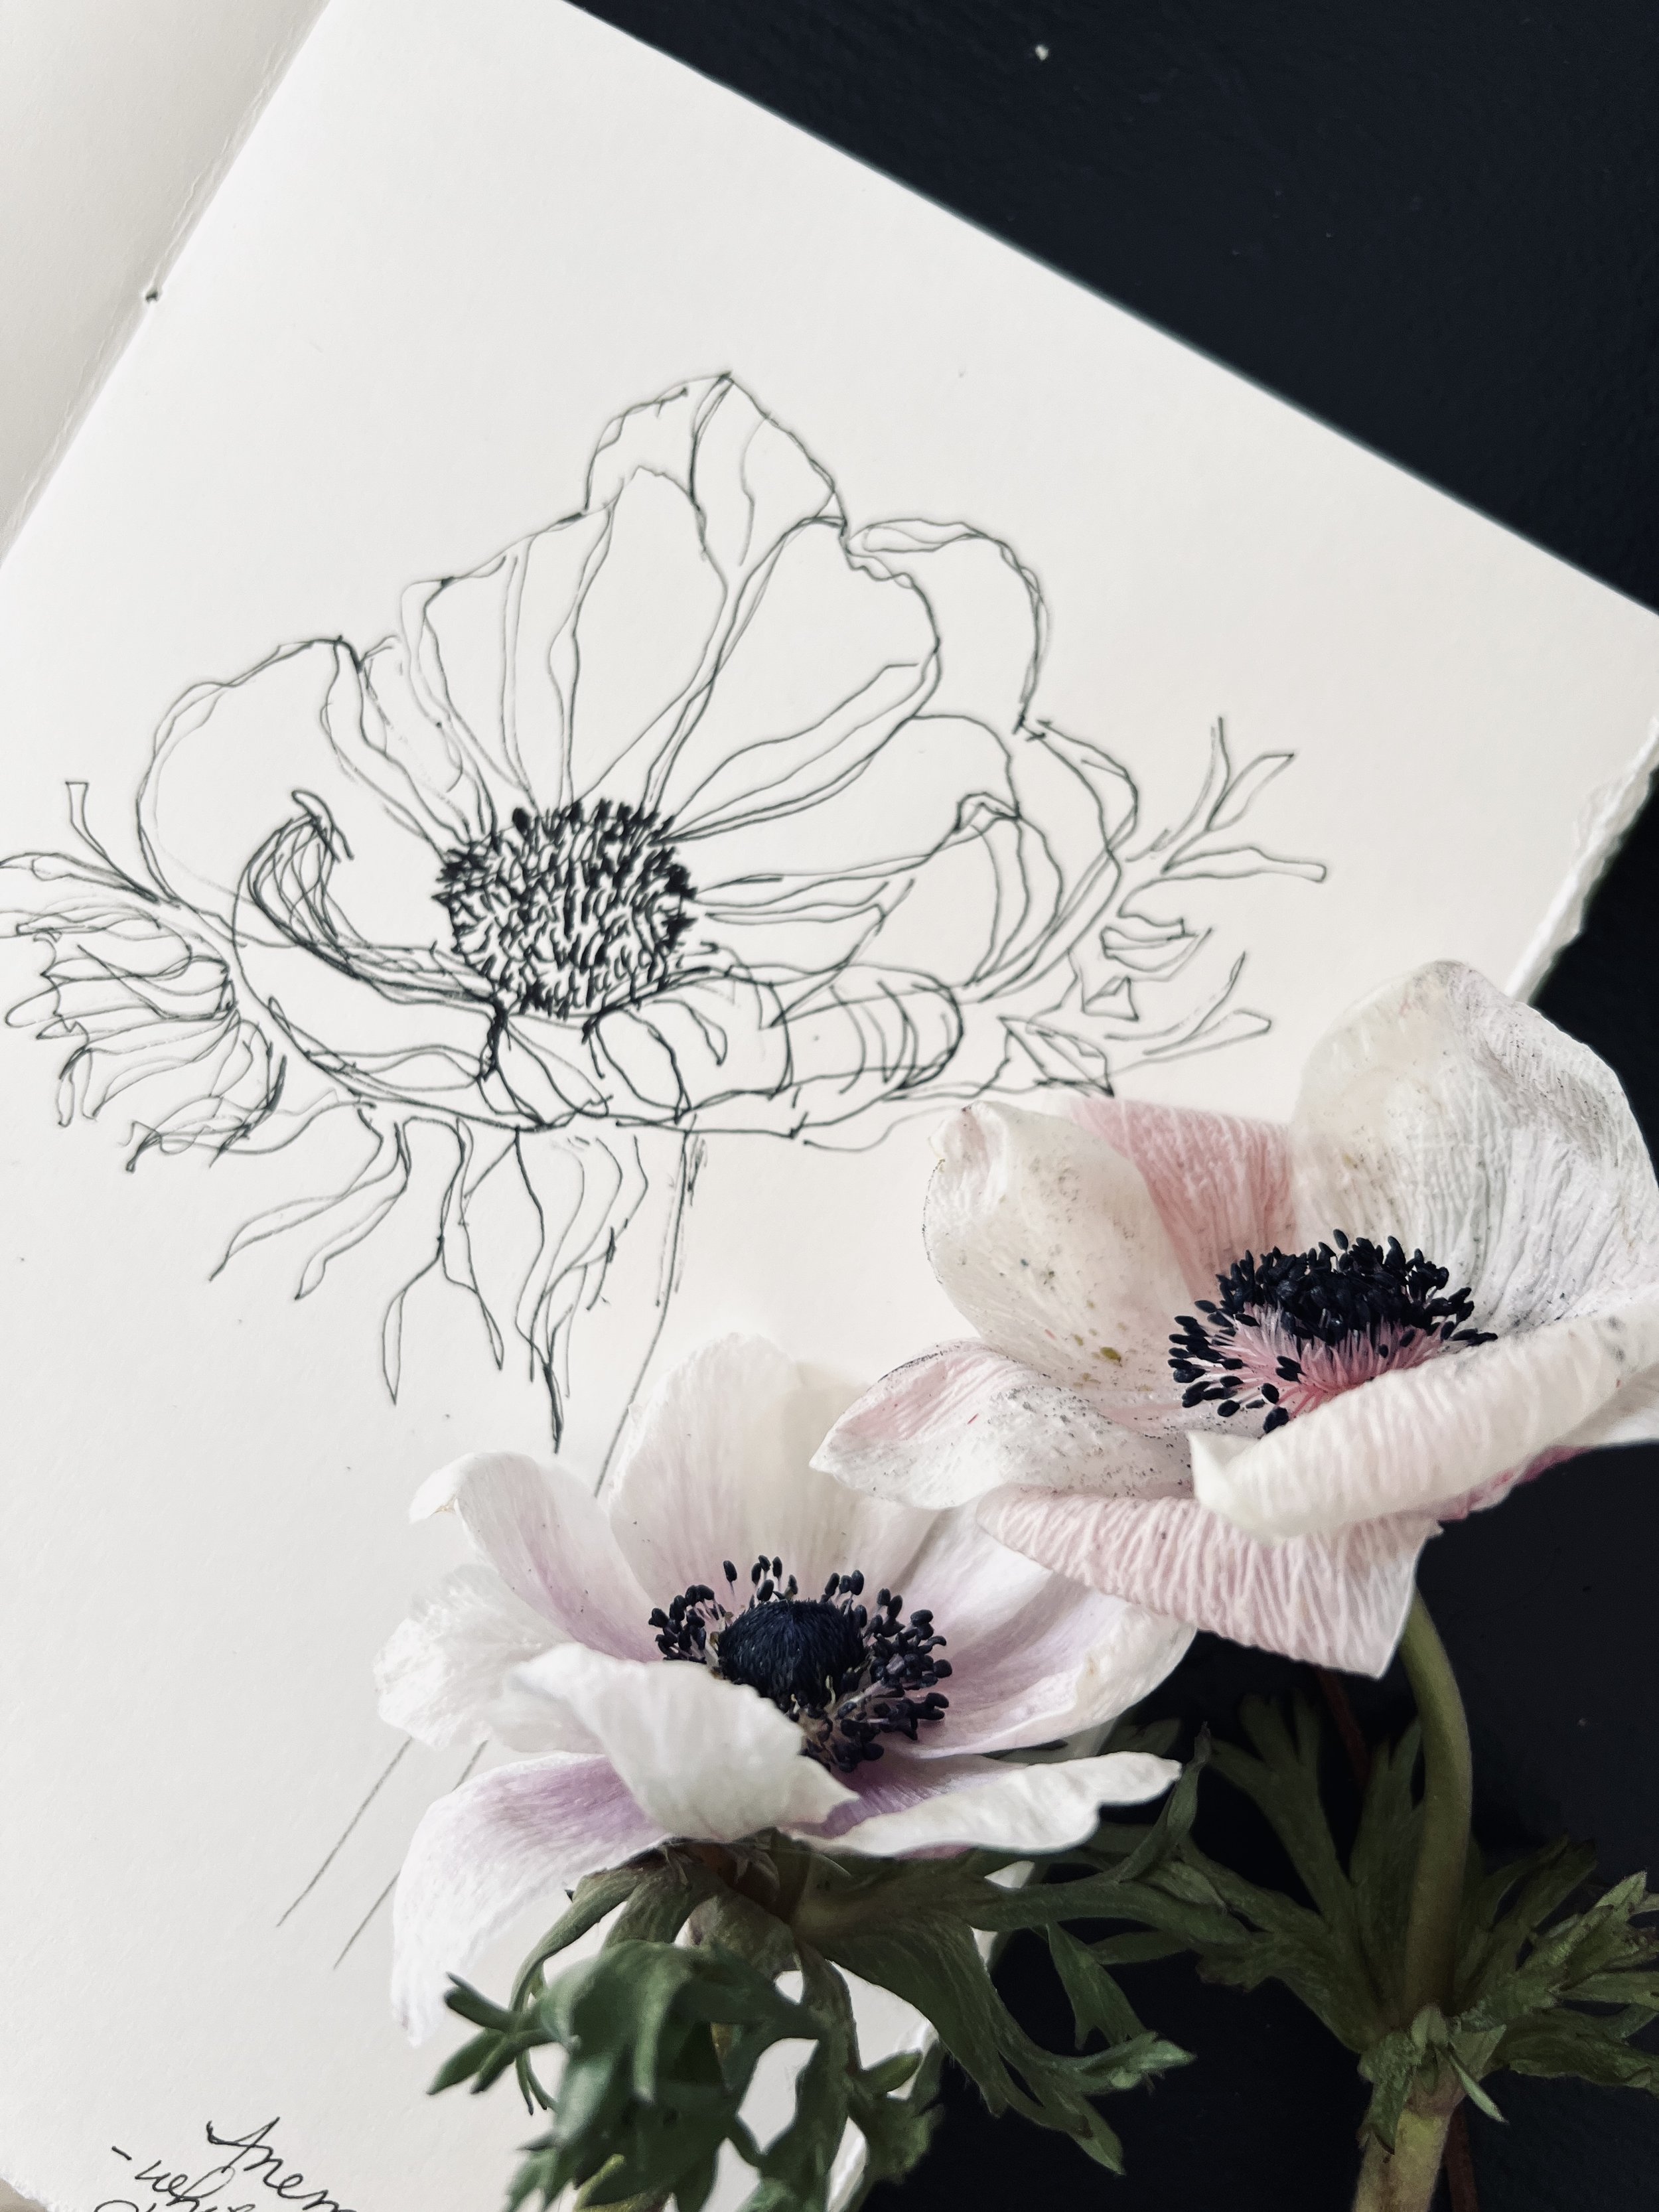 Oil Pastel Flower Drawings - How To Draw Pretty Flowers